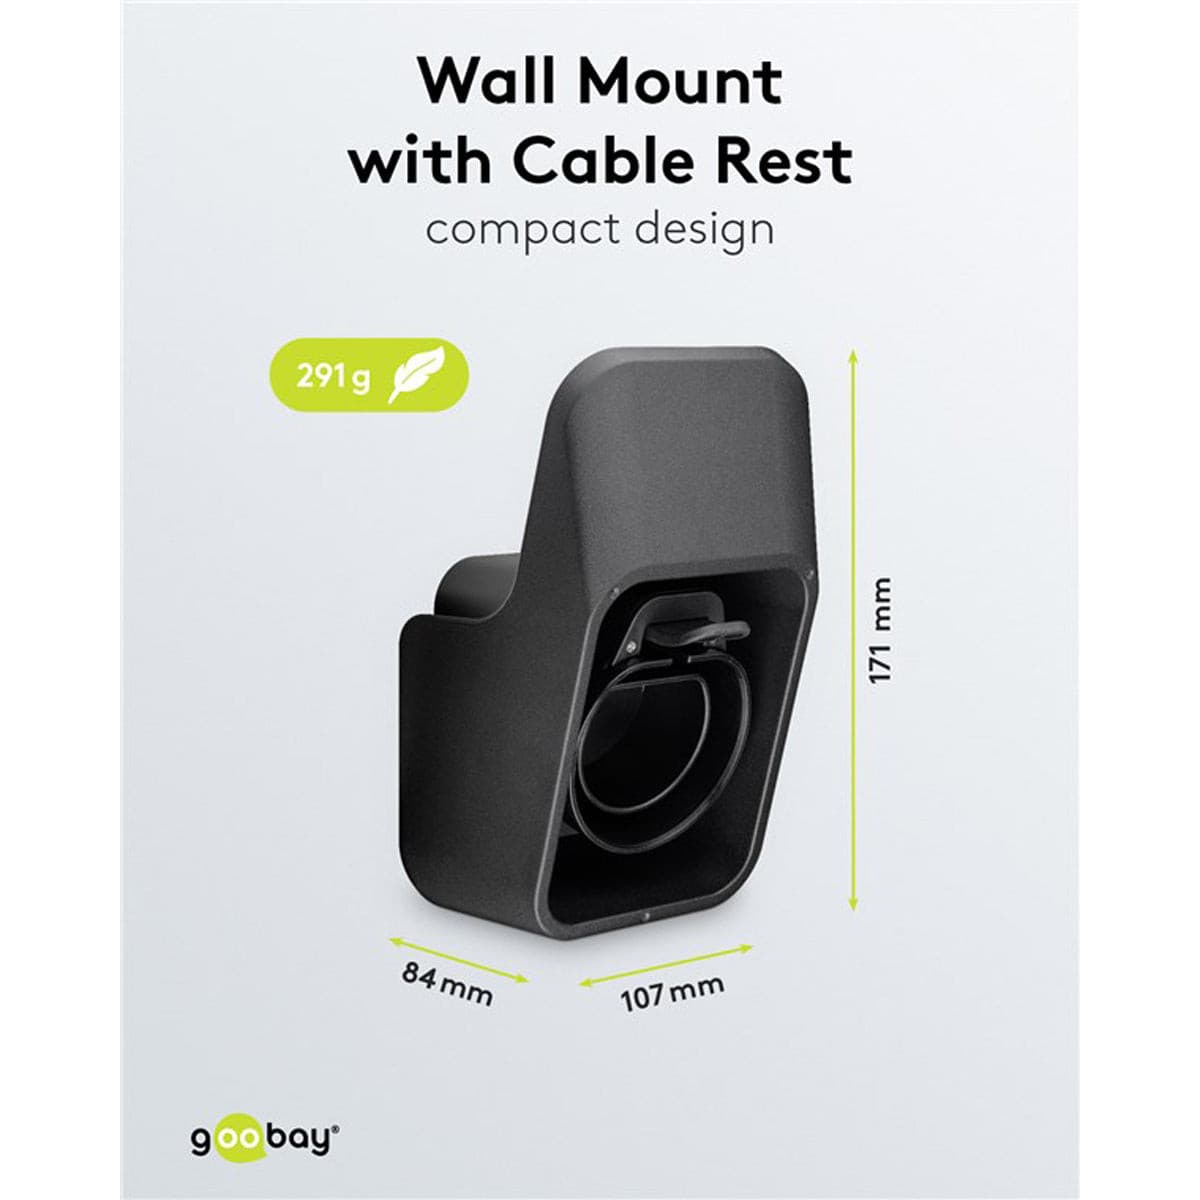 Goobay Wall Mount with Cable Rest for EV Type 2 Charging Cable - Black.